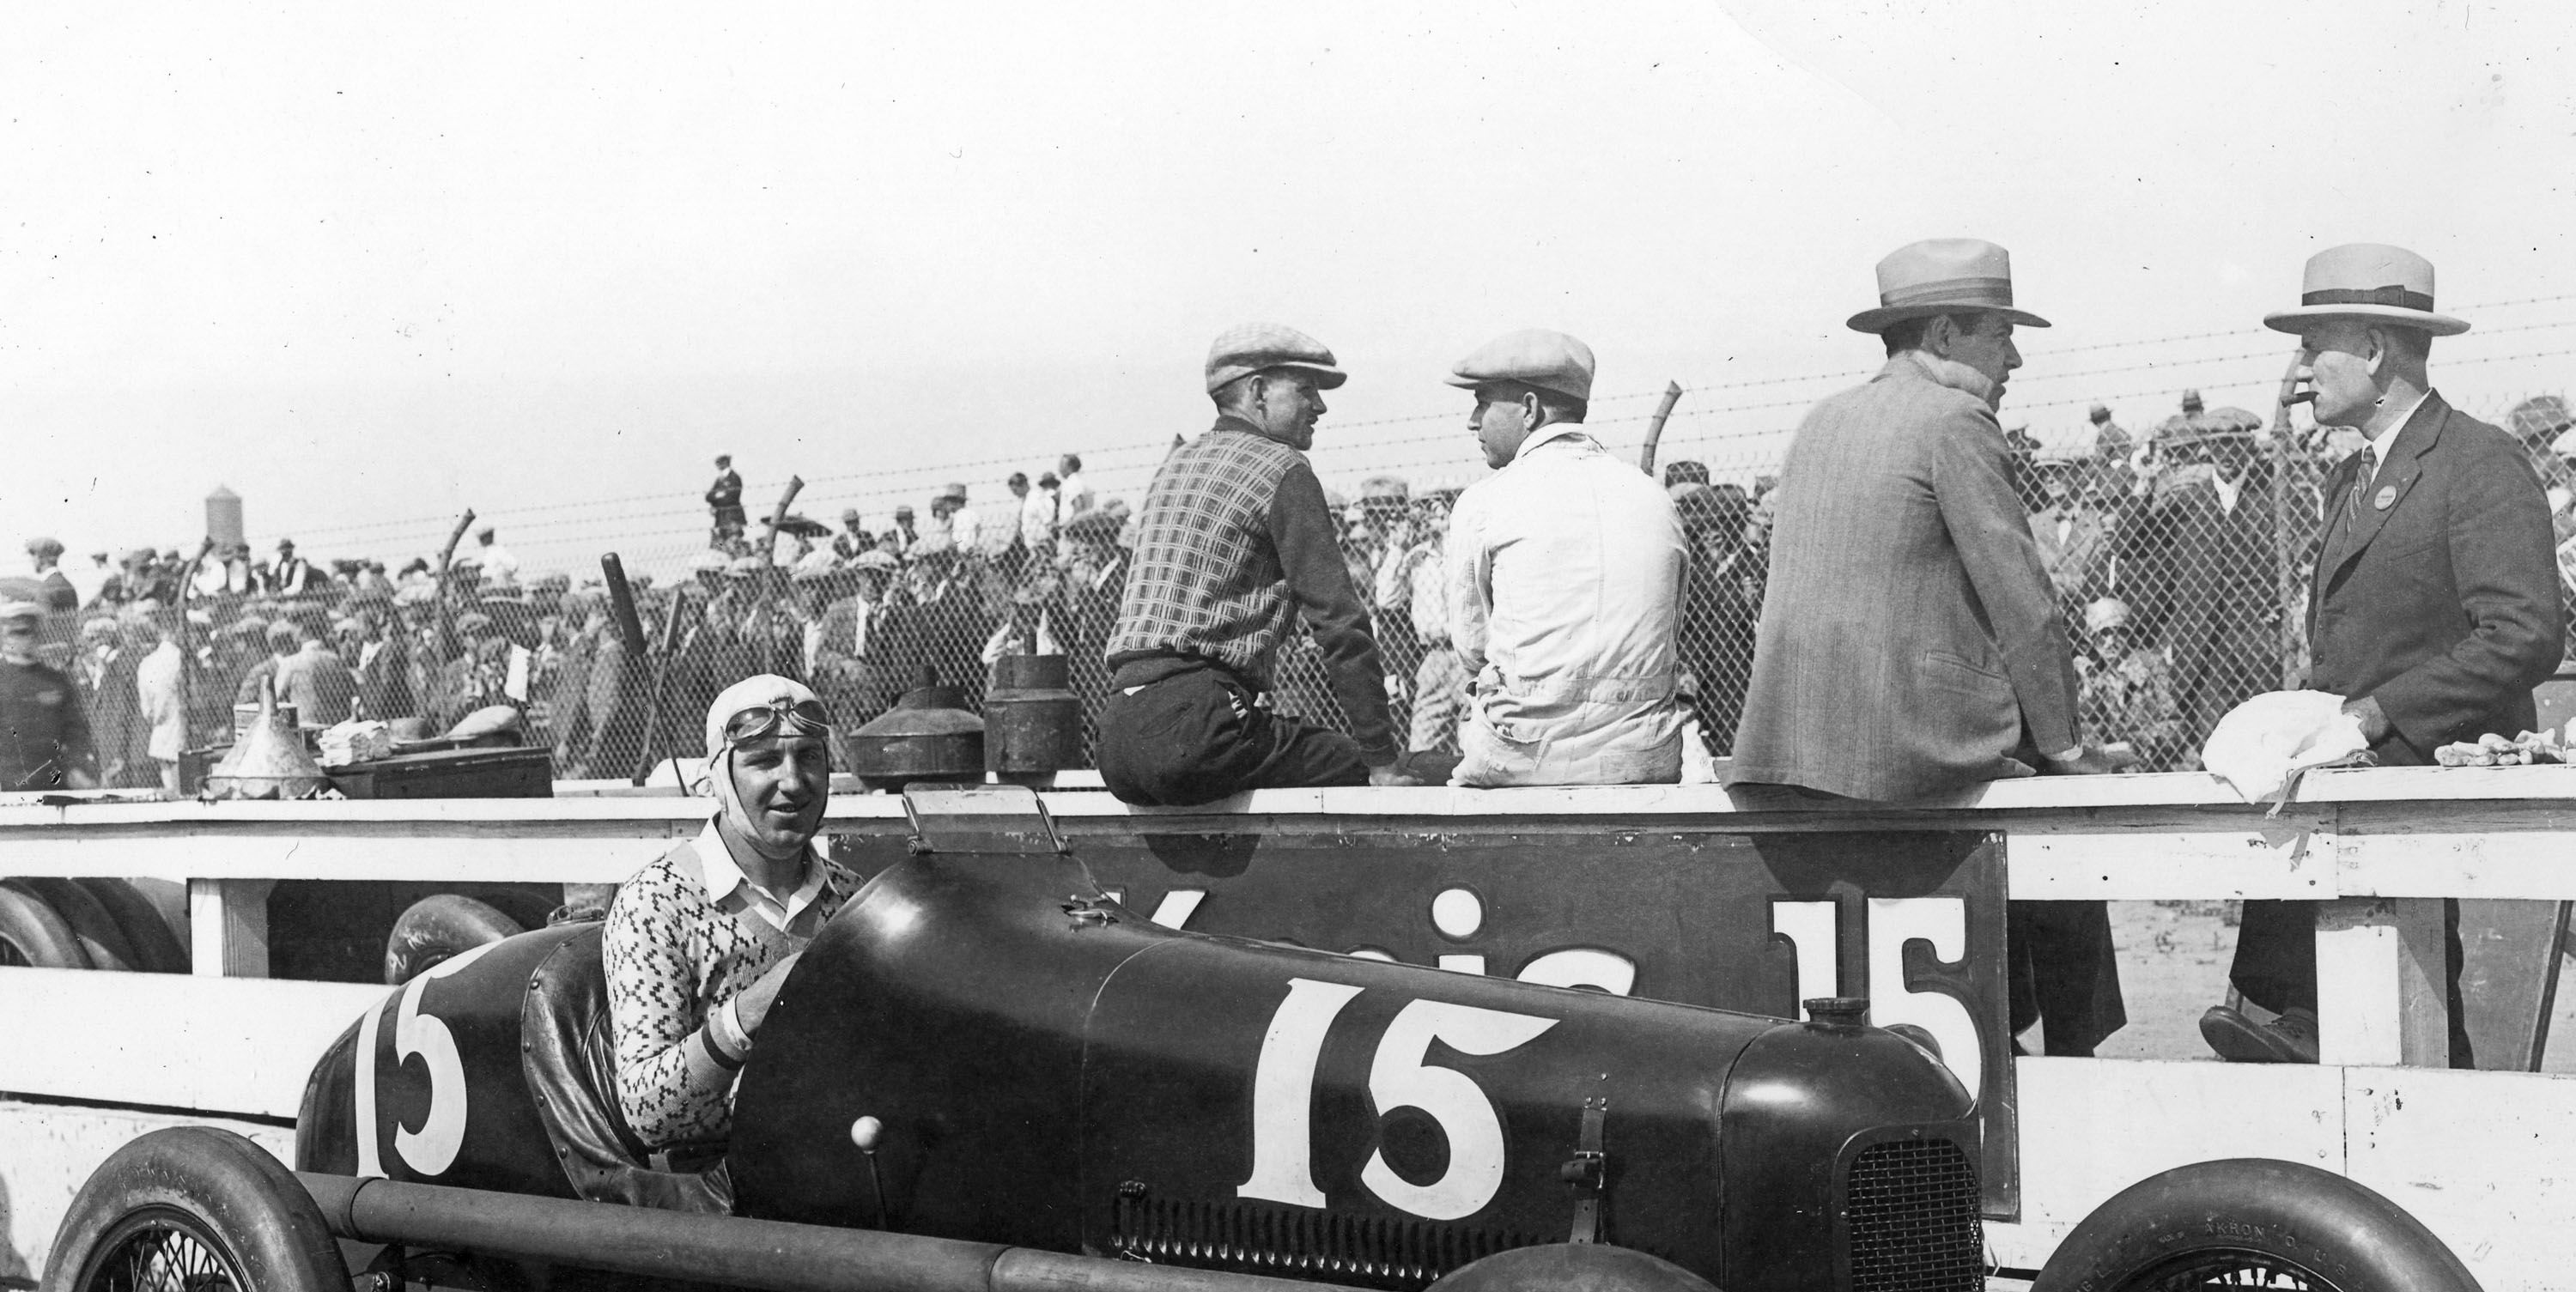 Death Drive: Was Indy 500 Racer Pete Kreis' 1934 Crash at Brickyard an Accident or Suicide?